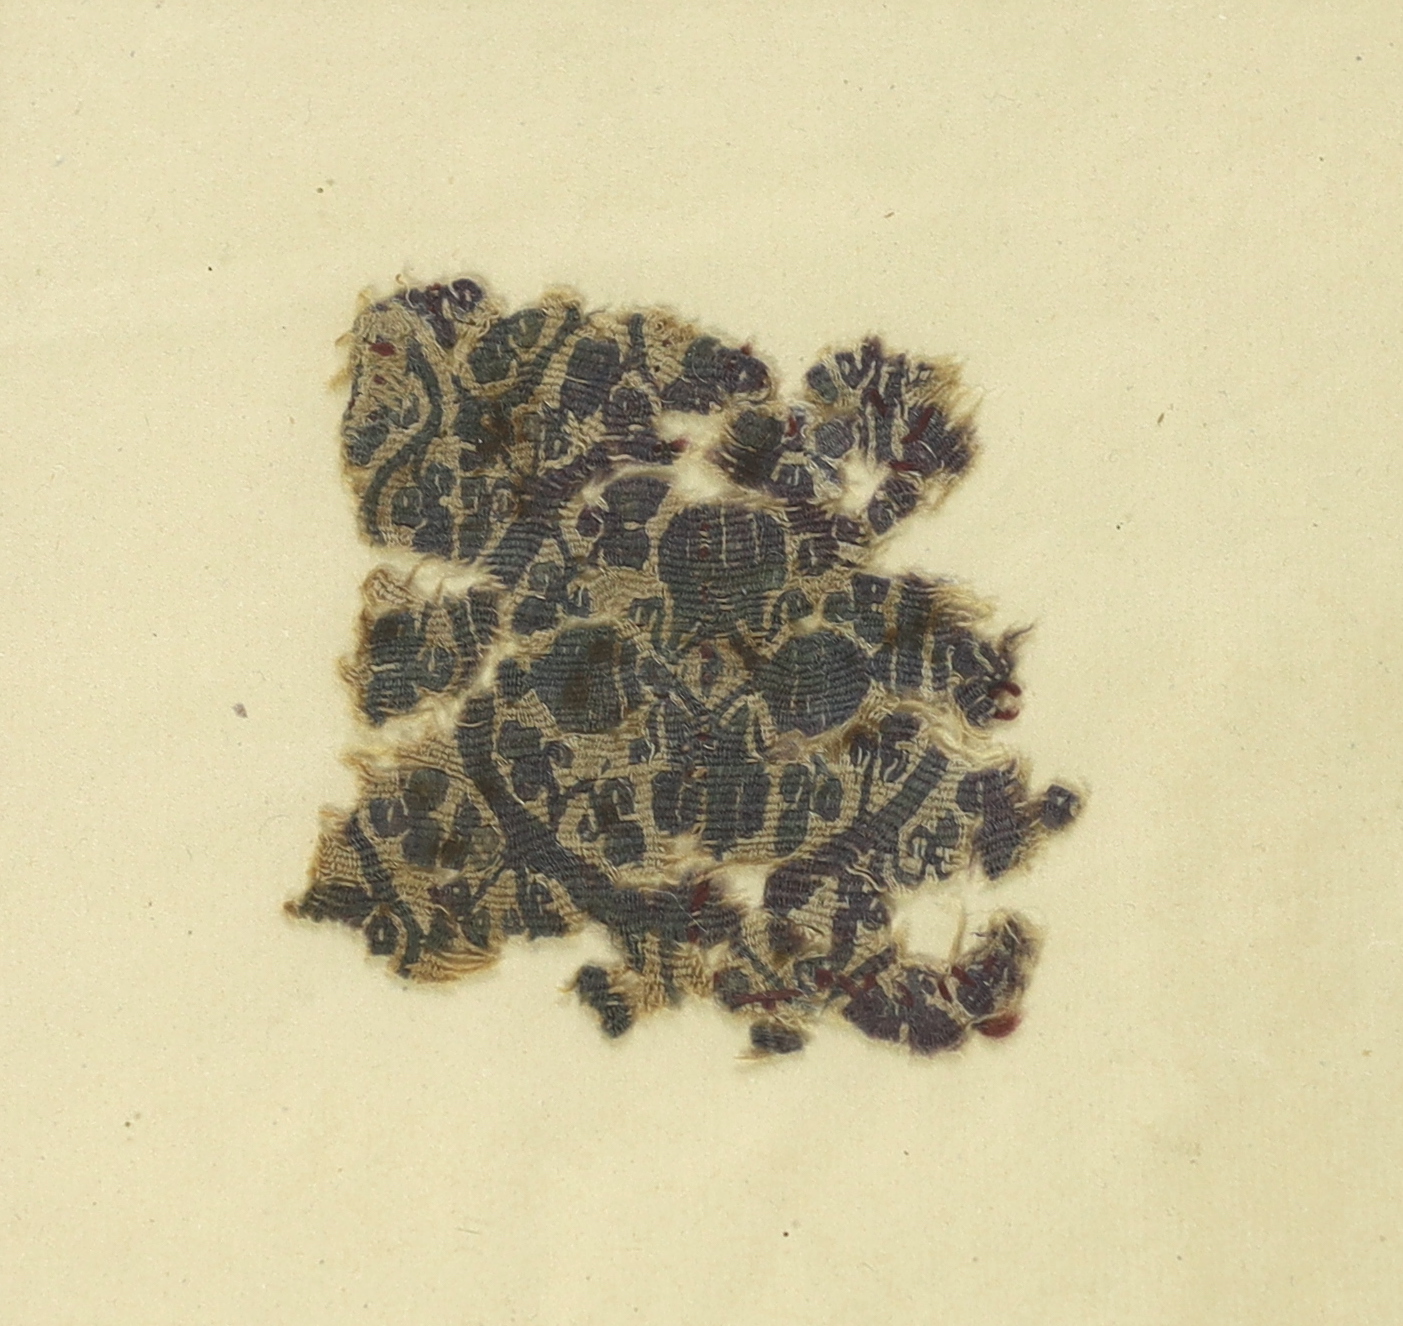 A framed 5th/6th century AD textile - a woven wool fragment, possibly Coptic, with central cartouche of four urns surrounded by vines, worked in blue on an unbleached beige ground (discoloured with age), including typed